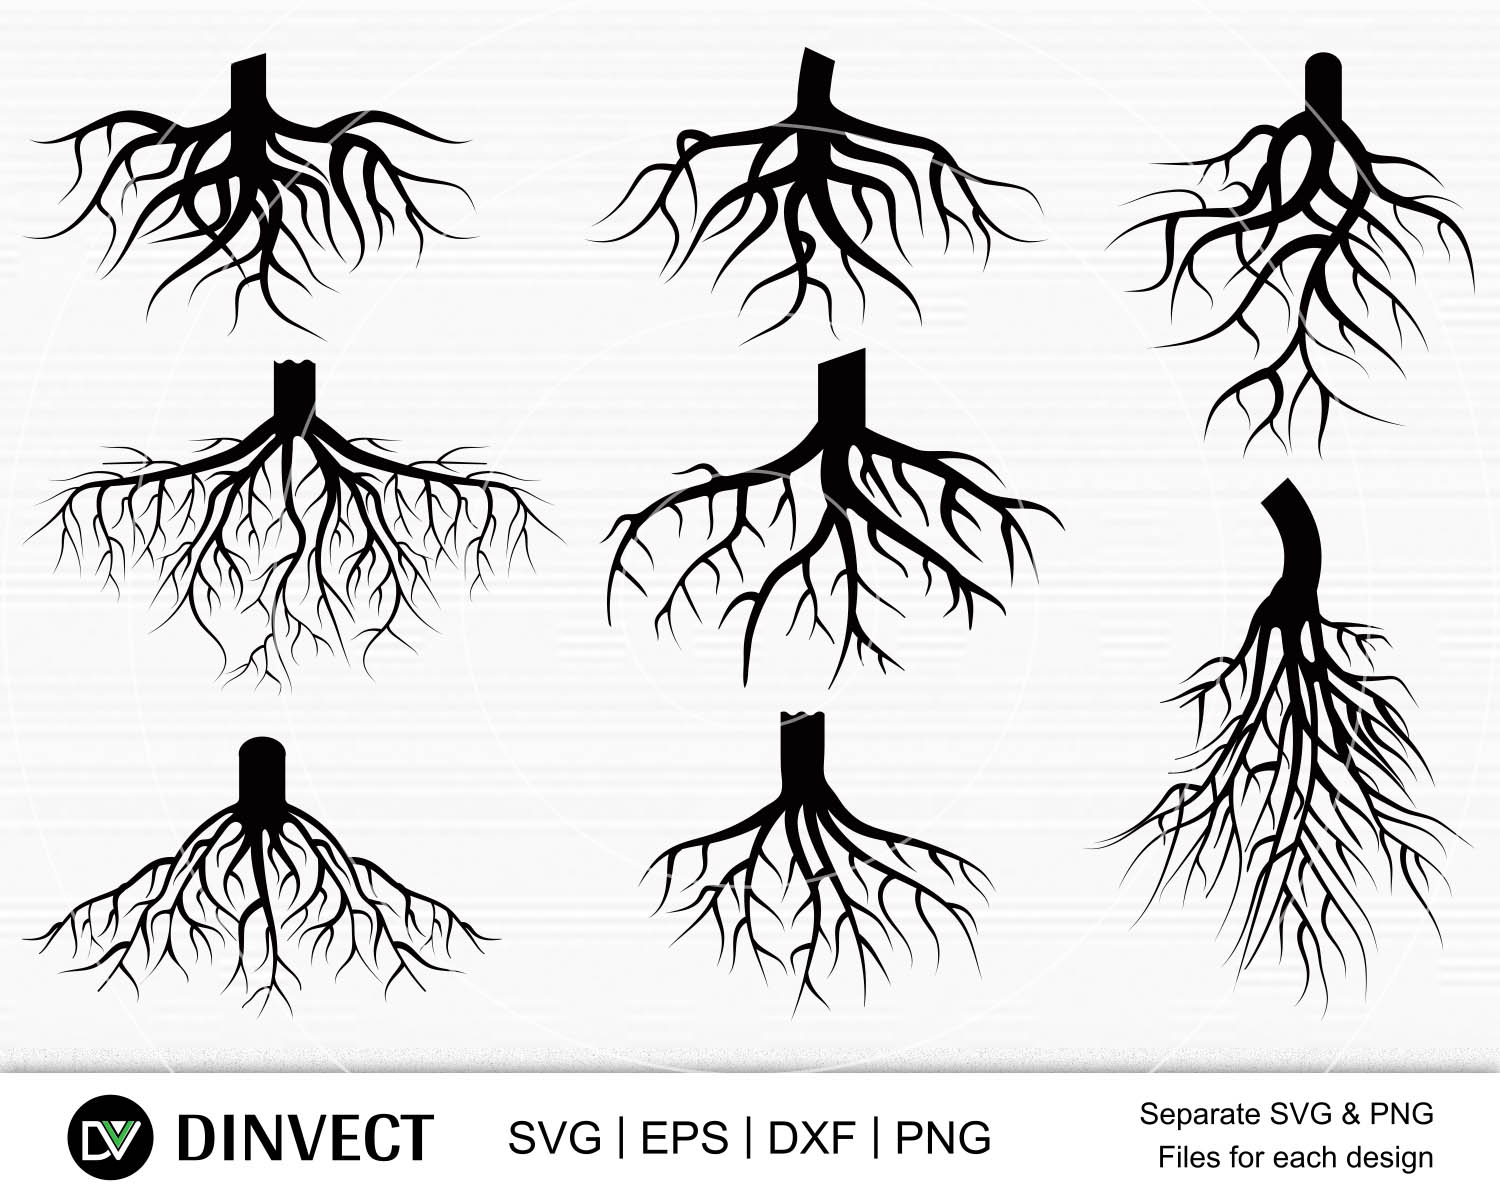 Download Roots Svg Roots Svg Bundle Tree Roots Svg Family Tree Svg Roots Vector Roots Clipart Roots Silhouette Cricut Cut Files Svg Eps Dxf Png So Fontsy